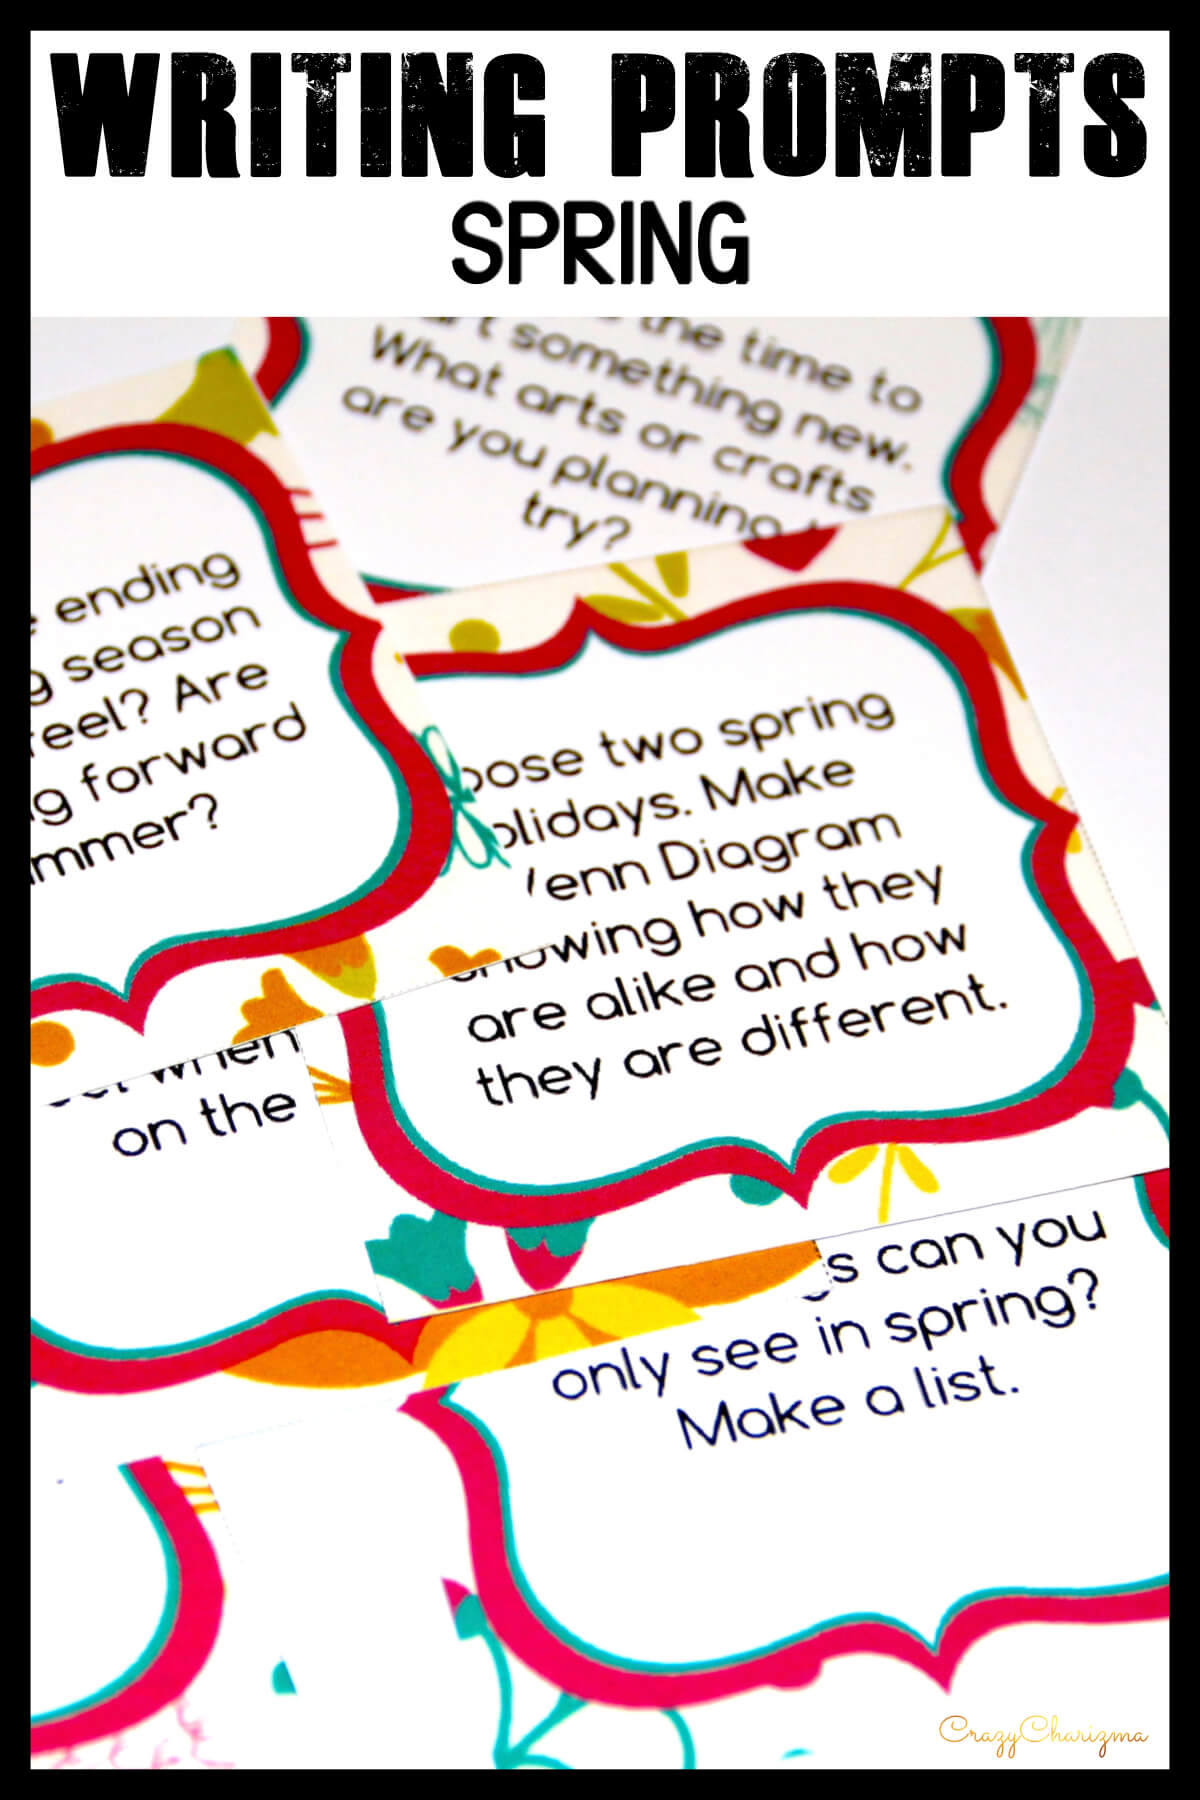 Celebrate SPRING in your classroom and provide students with writing tasks and ideas. The packet contains narrative, informational and opinion writing prompts for teens. The prompts can be used as Writing Centers, as well as with adults during ESL lessons.